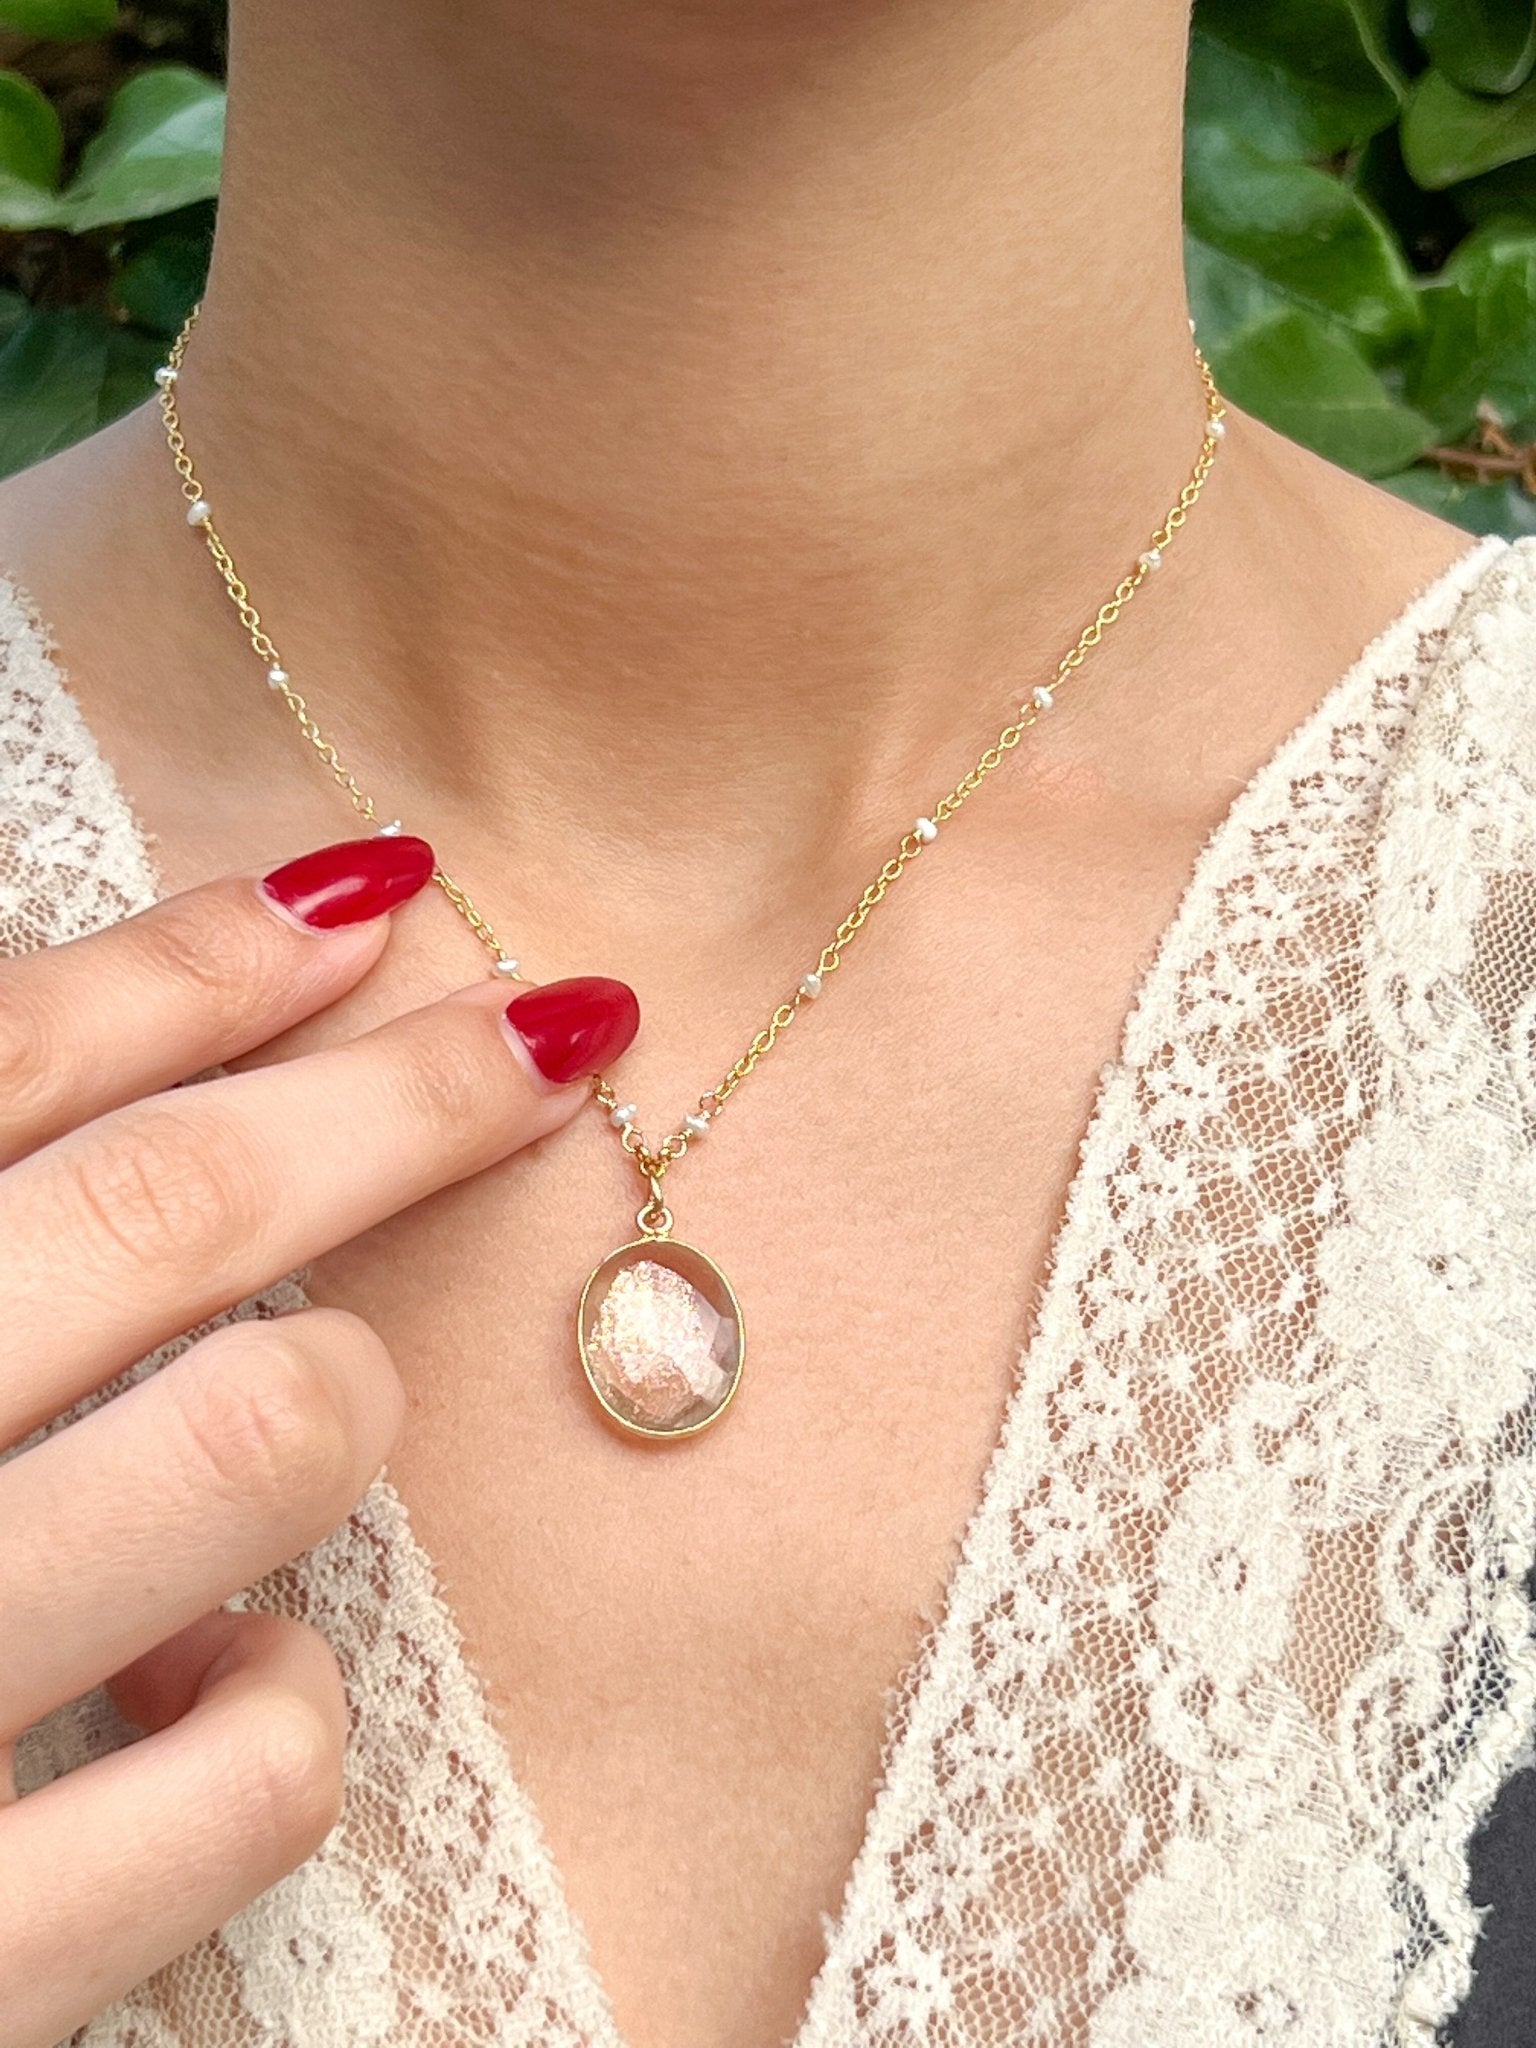 Sunstone Large Oval Pendant Necklace on Gold Chain with White Freshwater Pearls by Sage Machado - The Sage Lifestyle